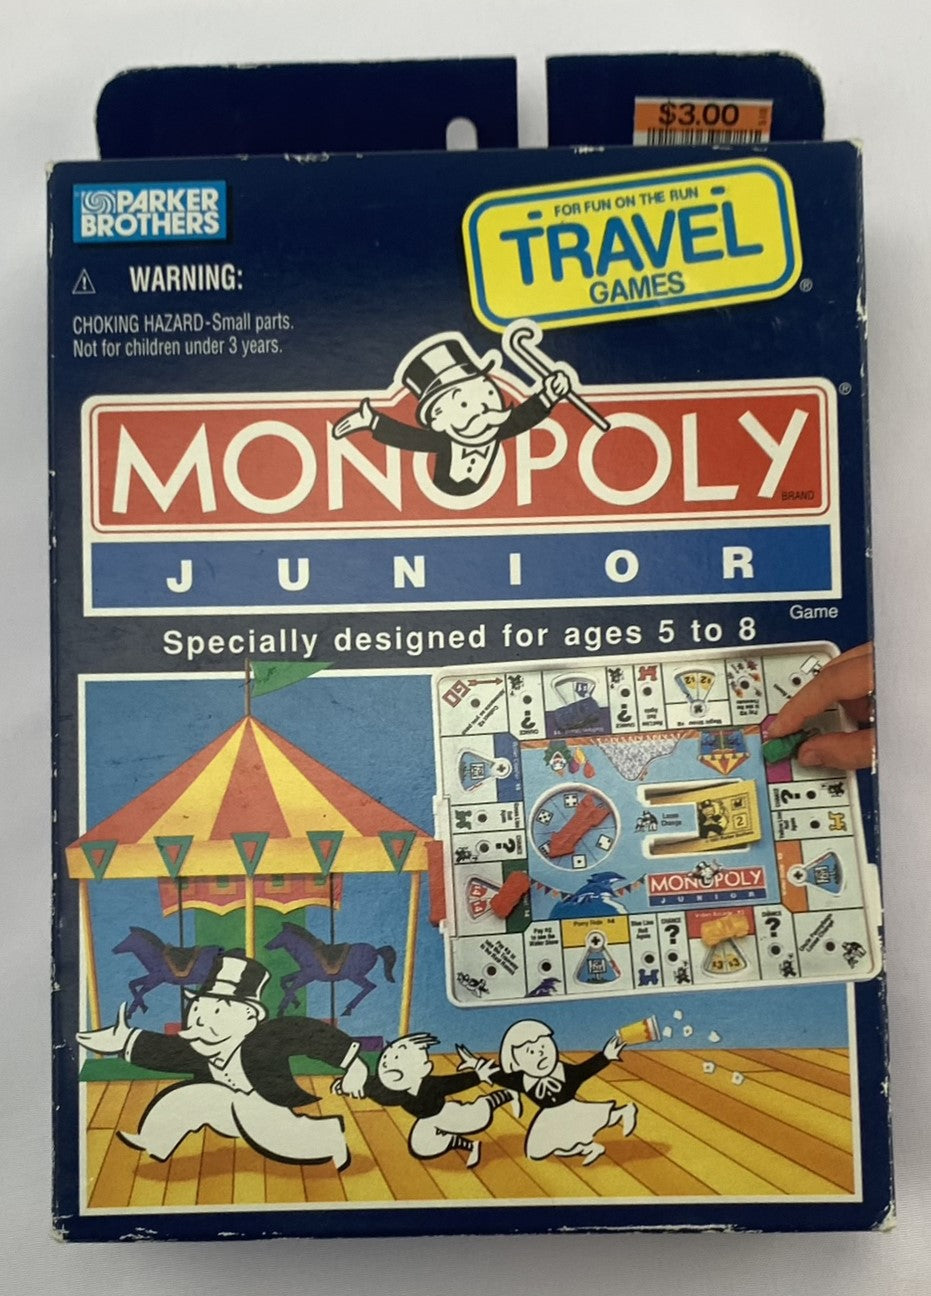 Monopoly Junior Travel Game - 1994 - Parker Brothers - Still Sealed